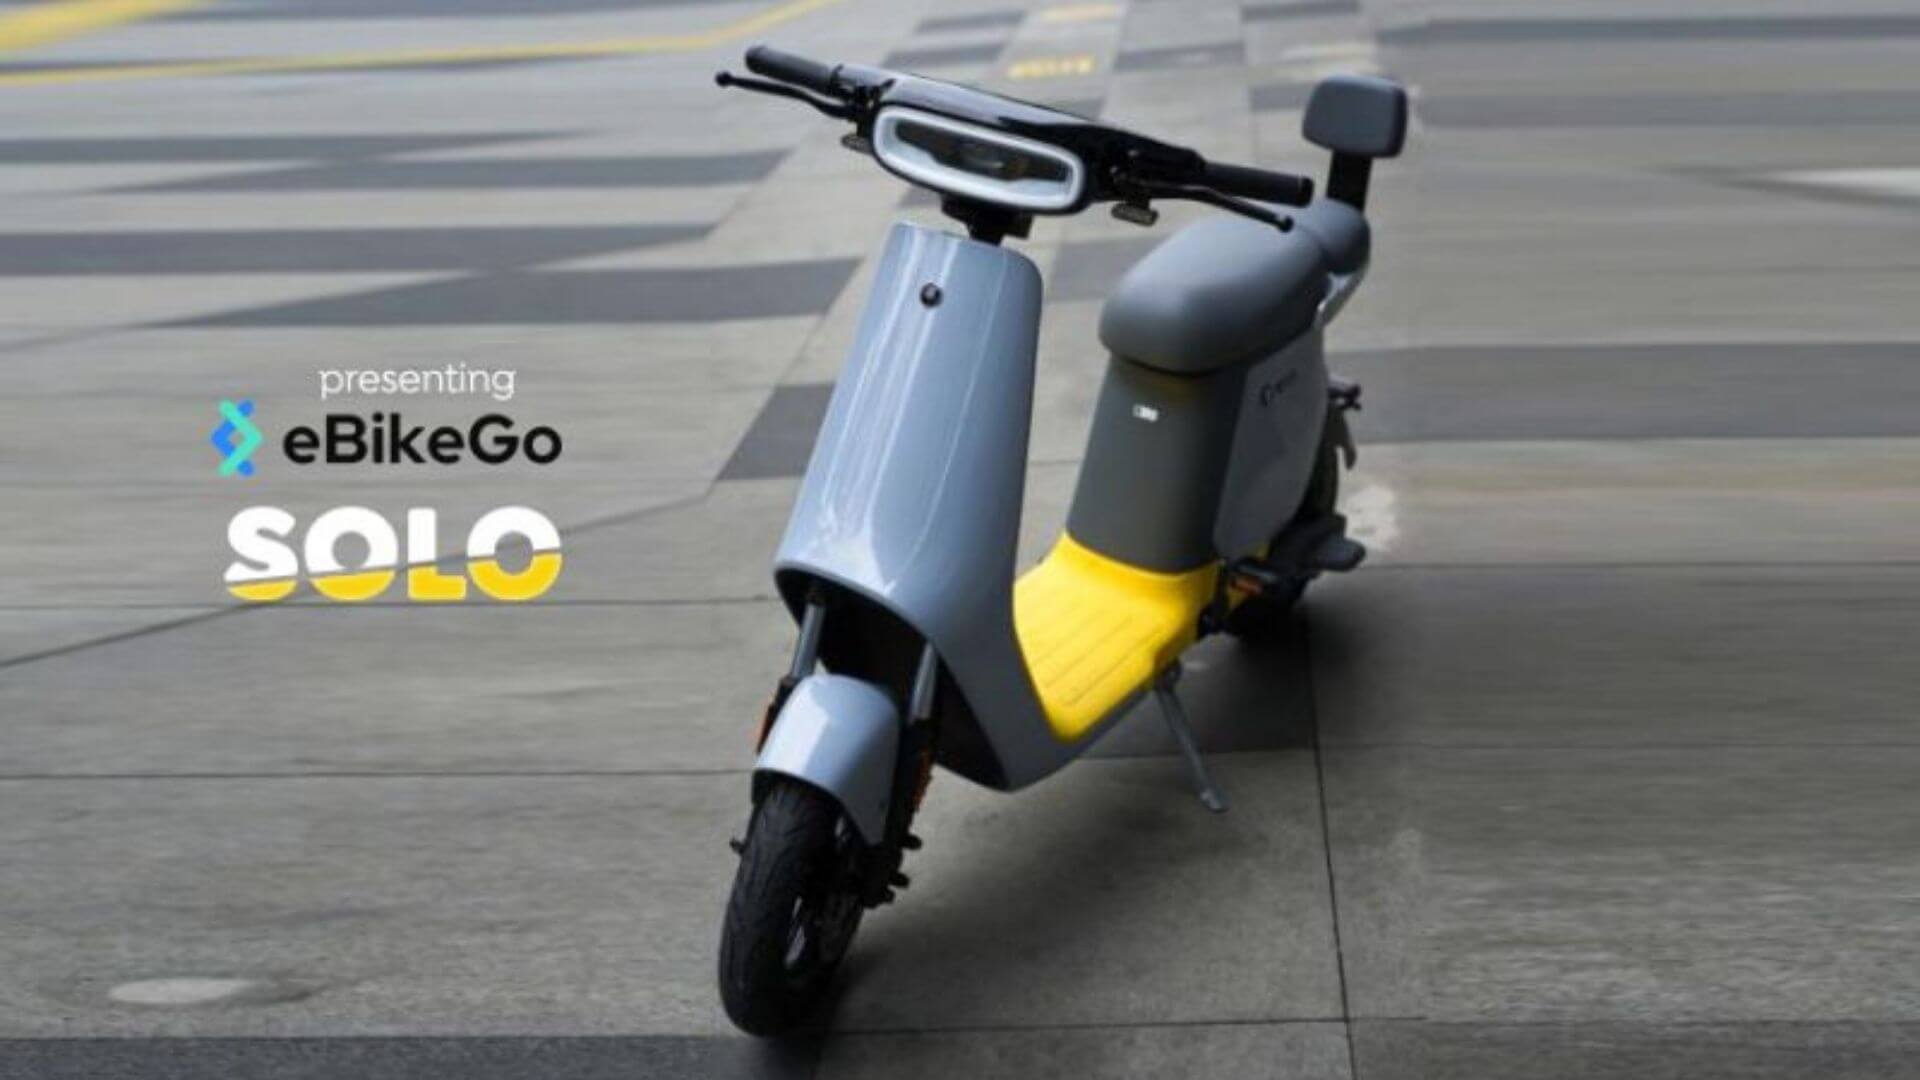 https://e-vehicleinfo.com/ebikego-solo-electric-scooter-to-launch/